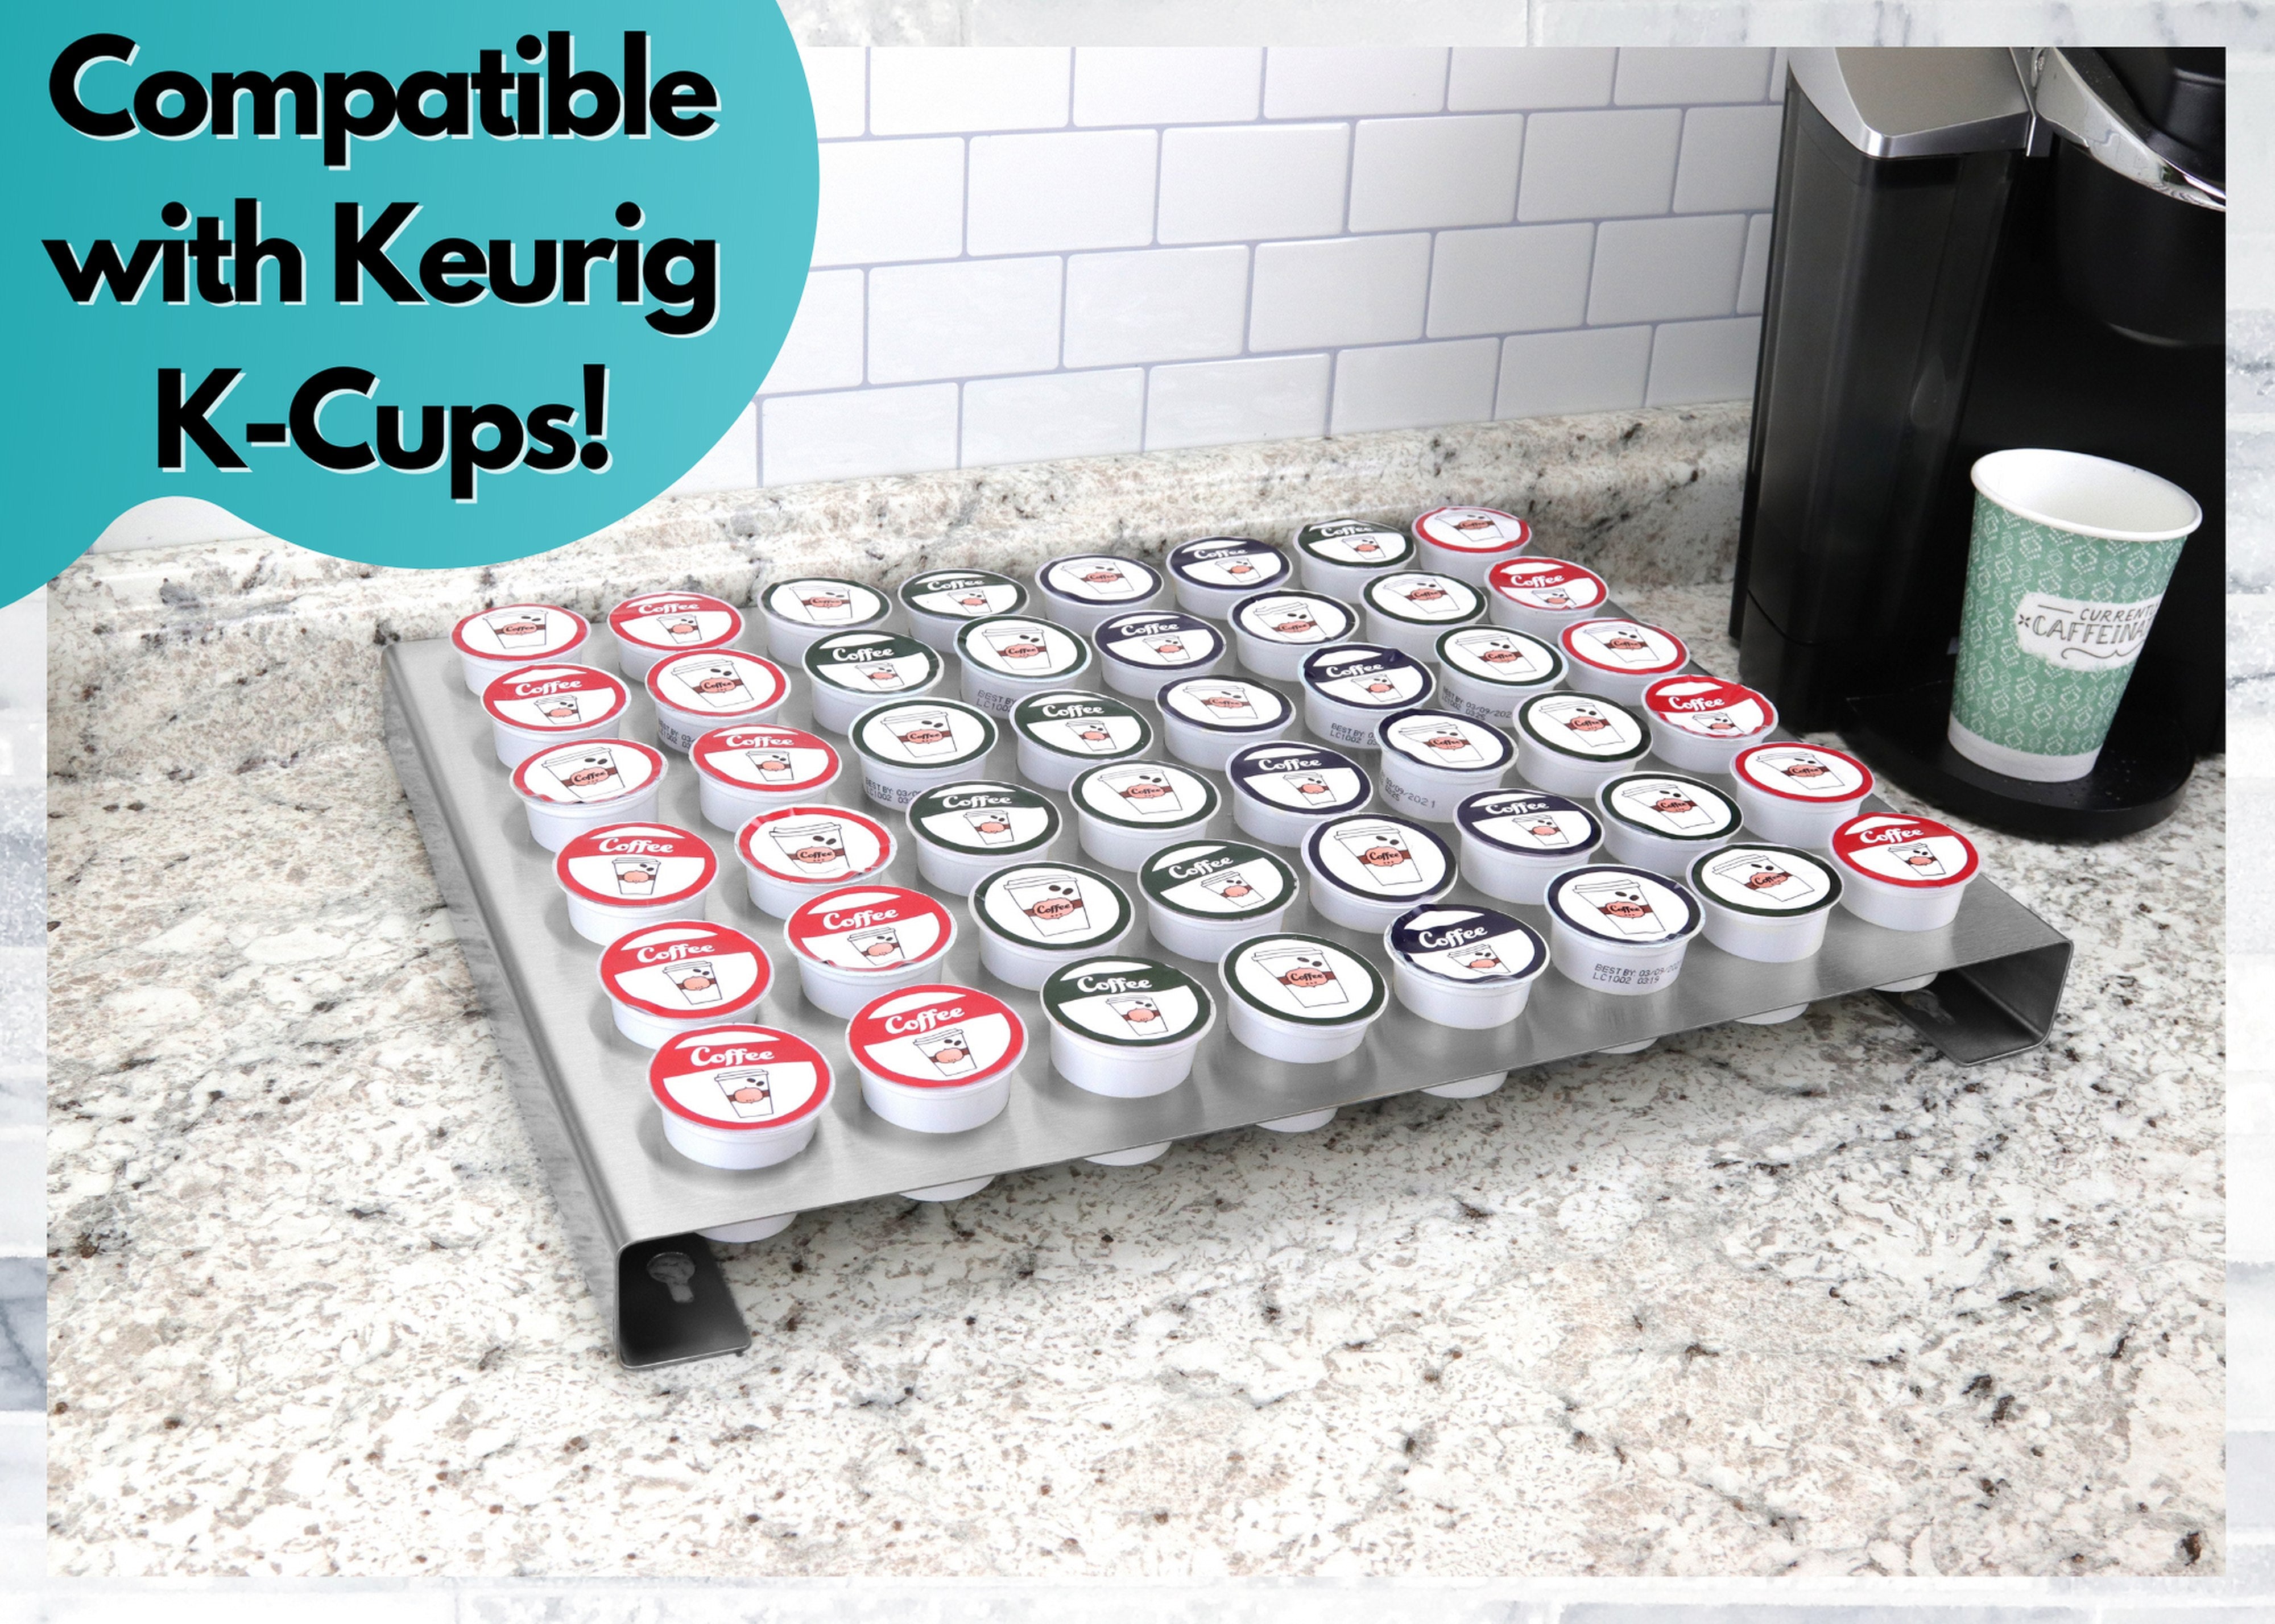 Coffee Pod Brushed Stainless Steel Organizer Tray Fits Keurig K-Cup Holds 48